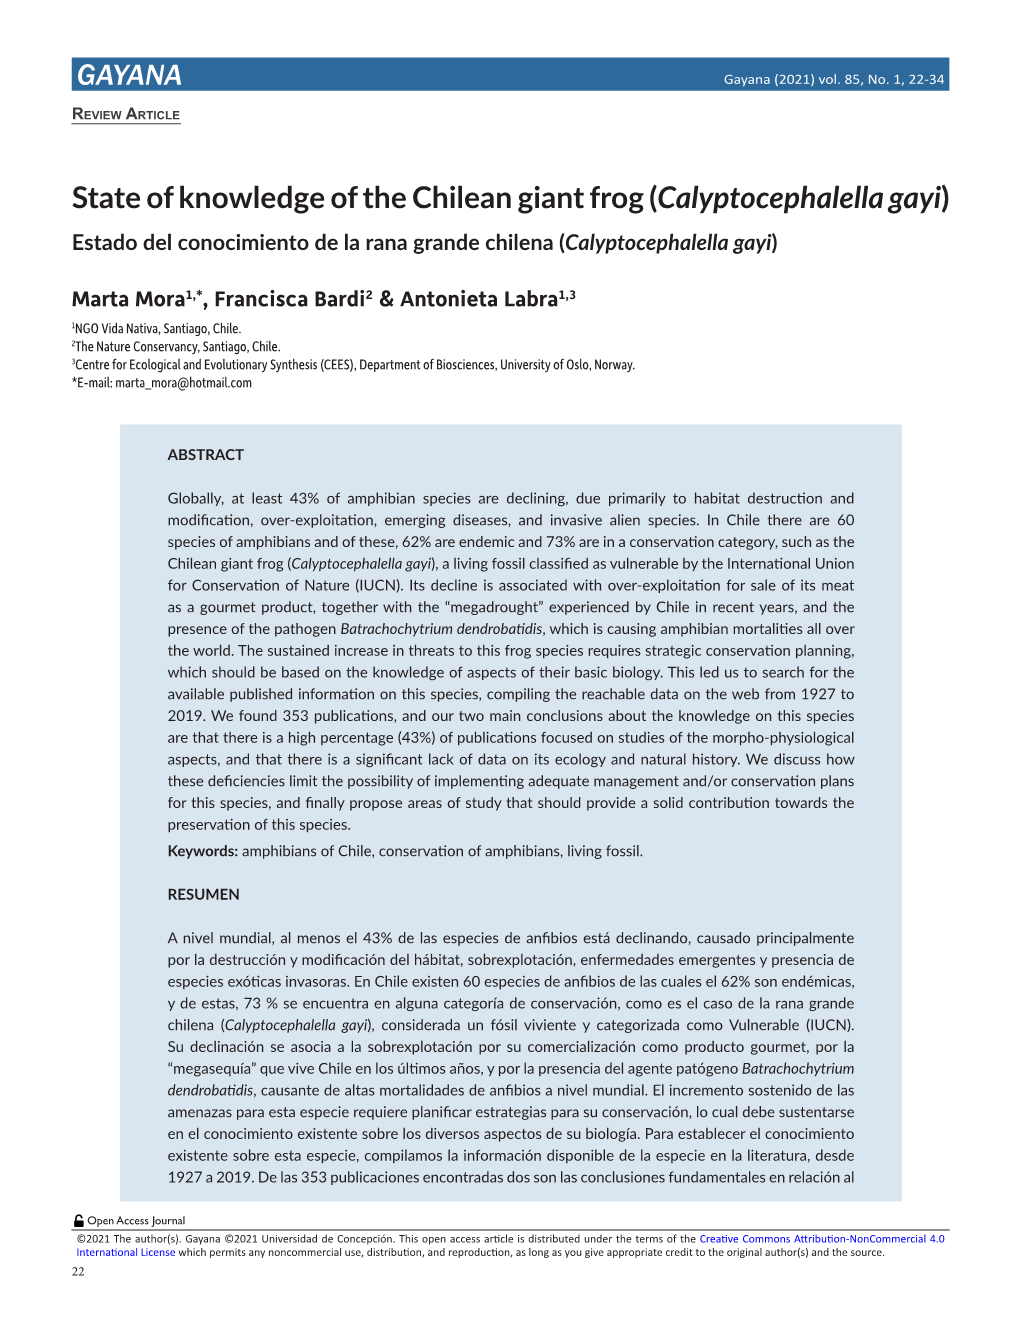 GAYANA State of Knowledge of the Chilean Giant Frog